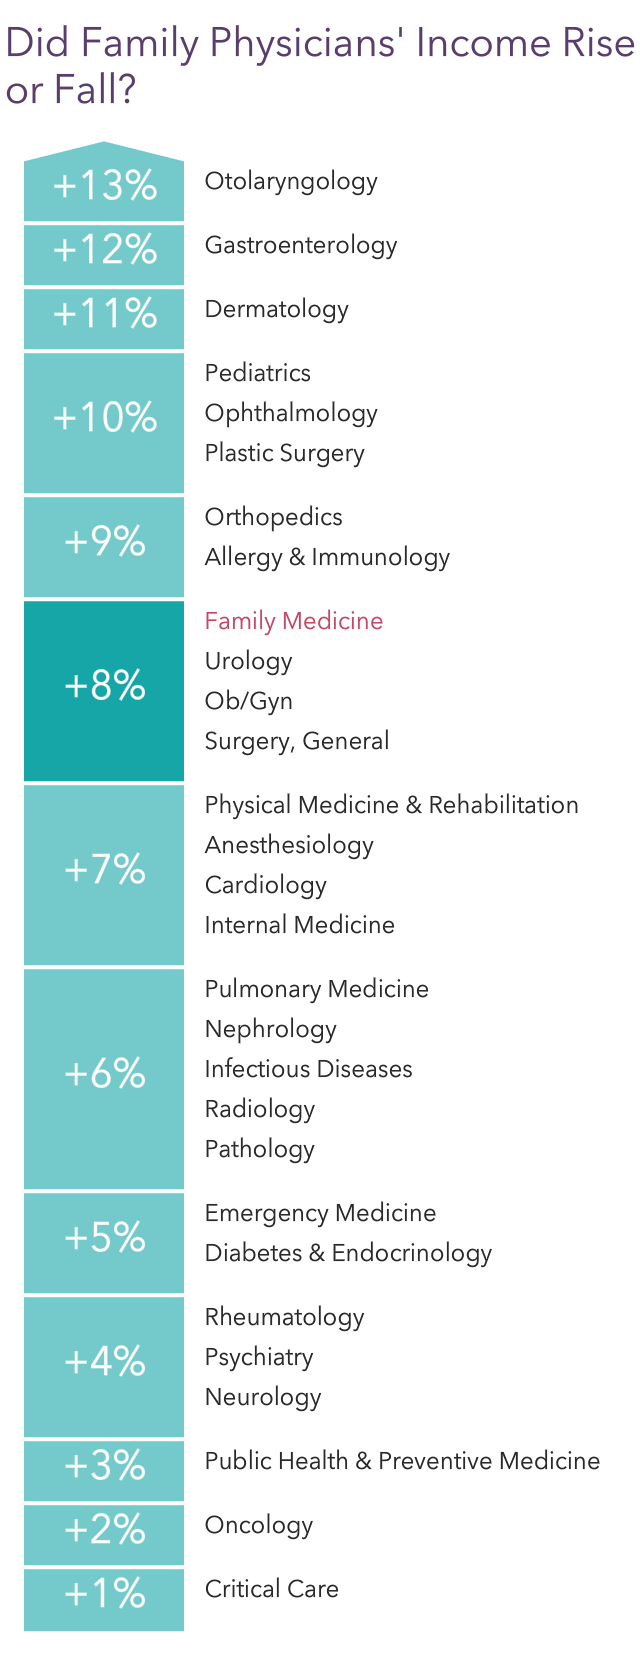 Medscape Family Physician Compensation Report 2022 Gain, Pay